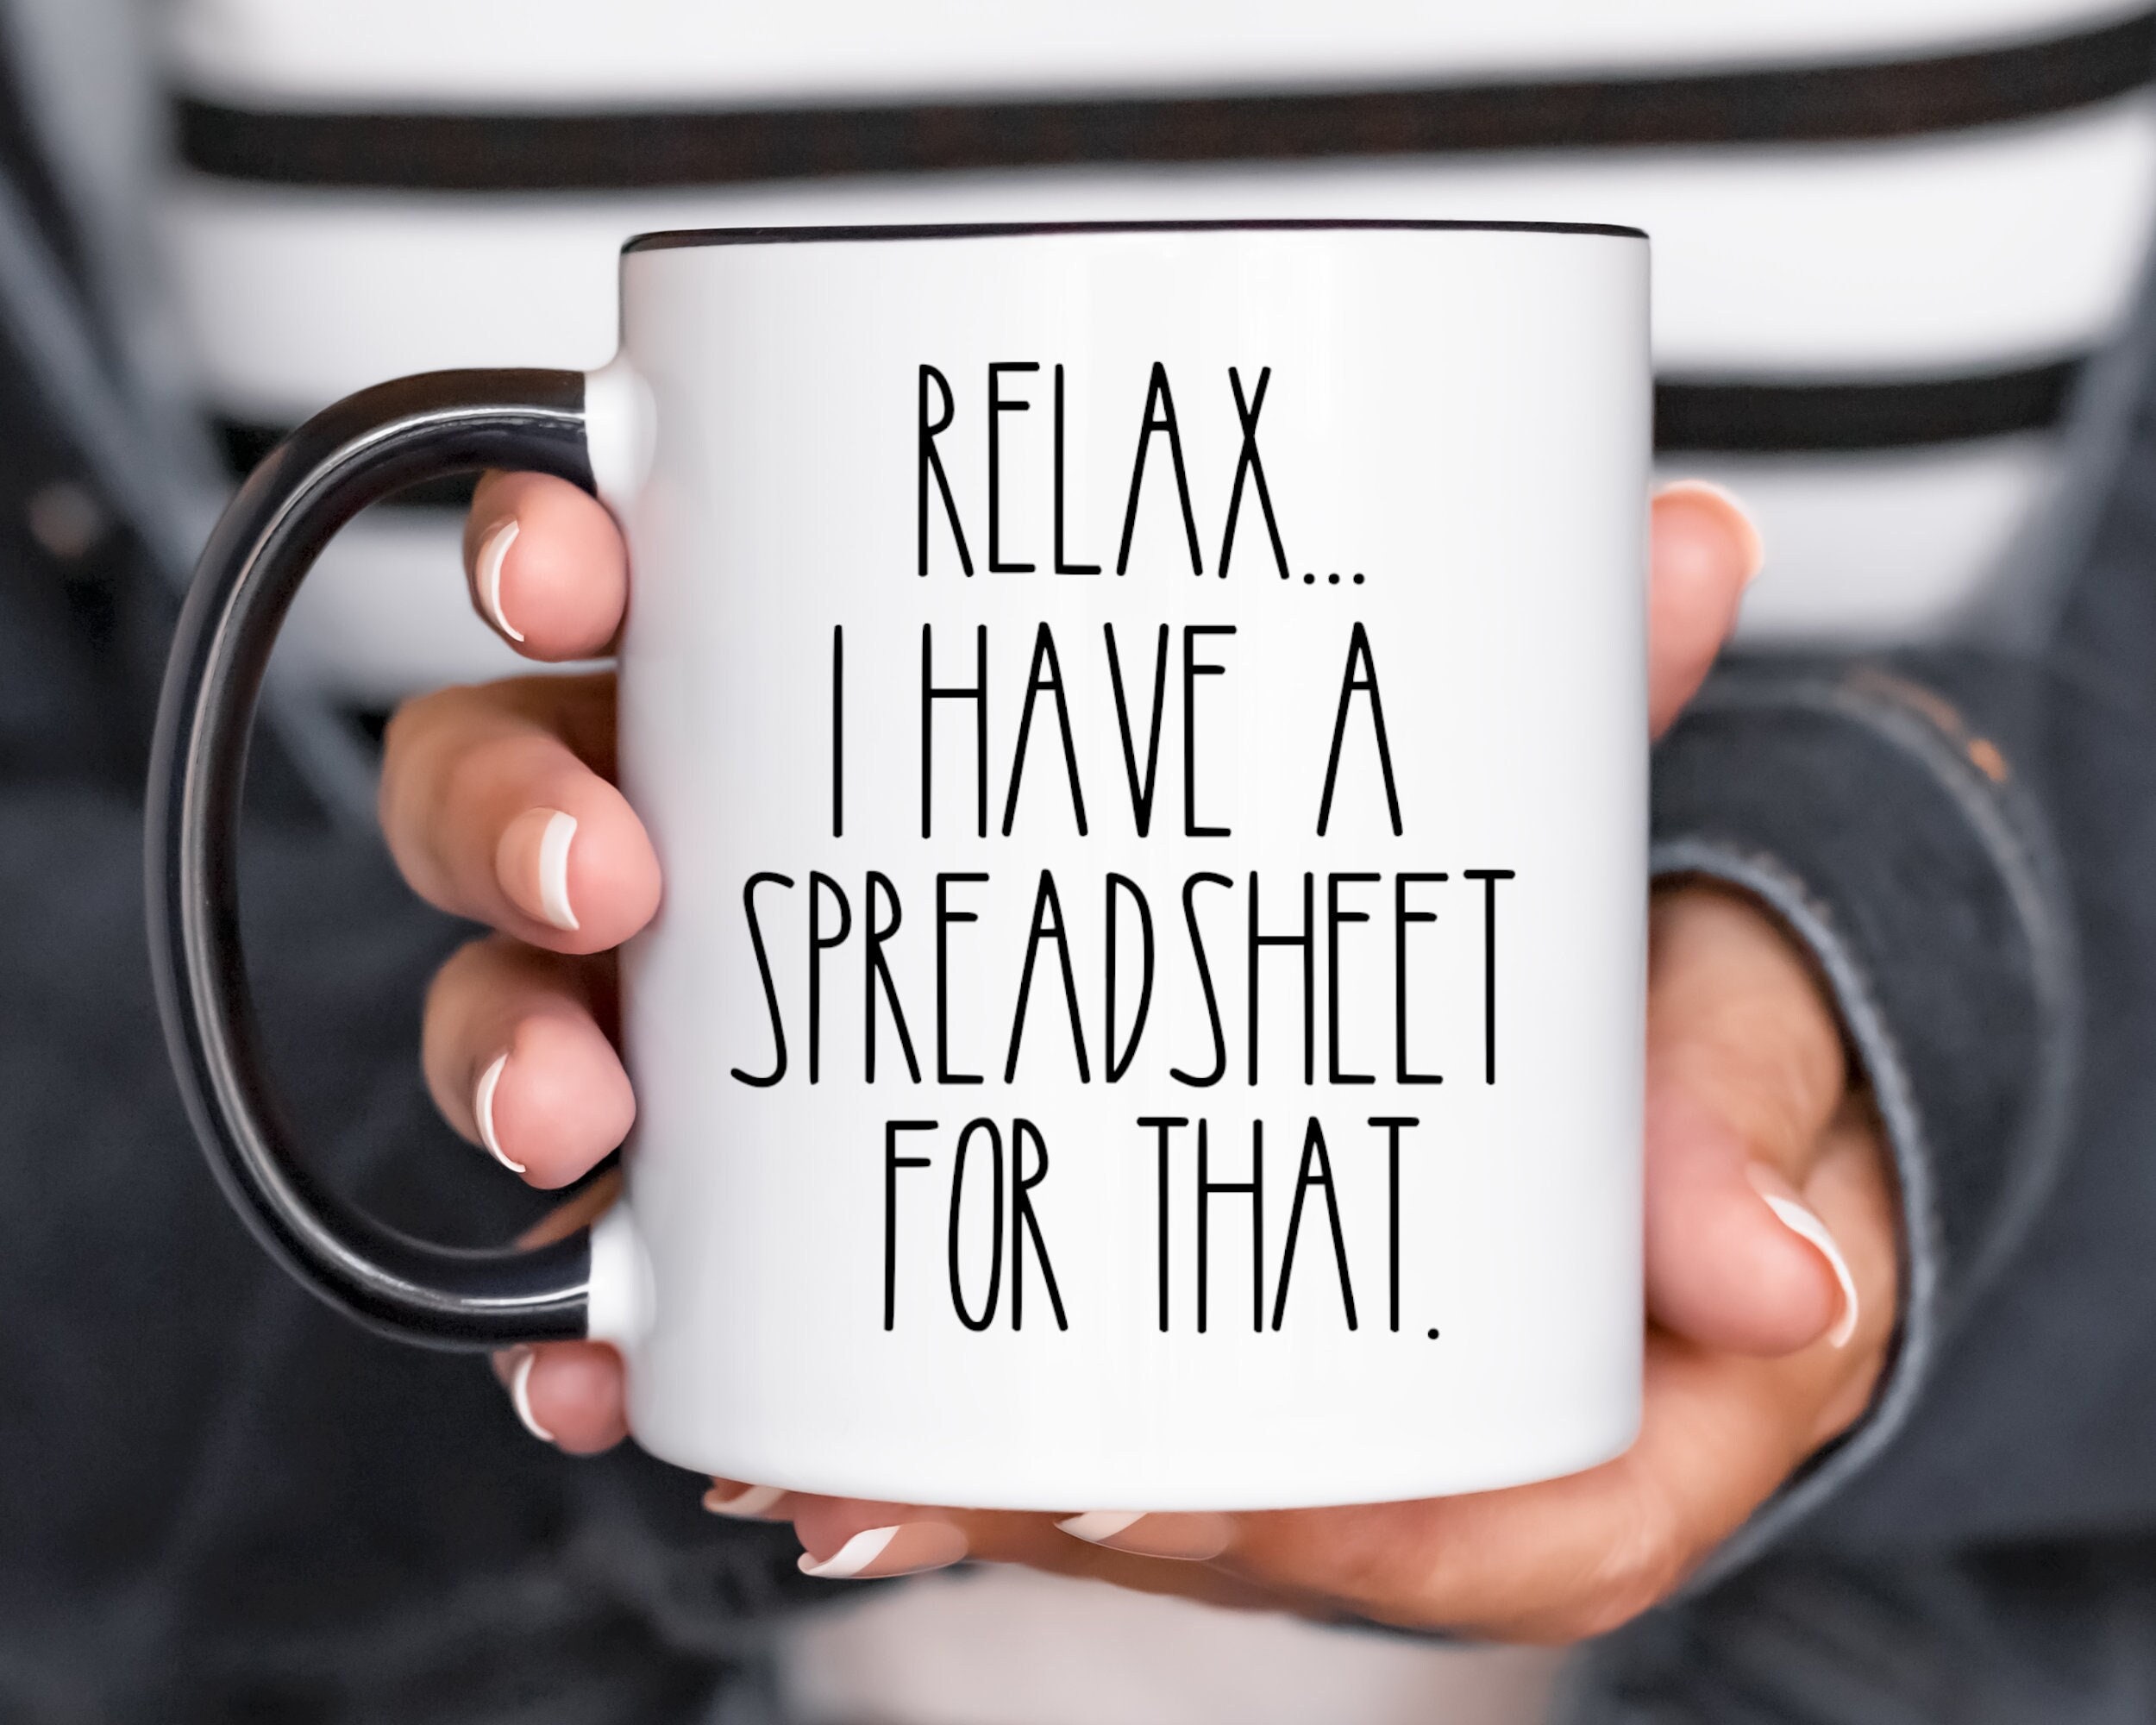 This Calls for A Spreadsheet, Nerdy Desk Accessories, Nerdy Gifts